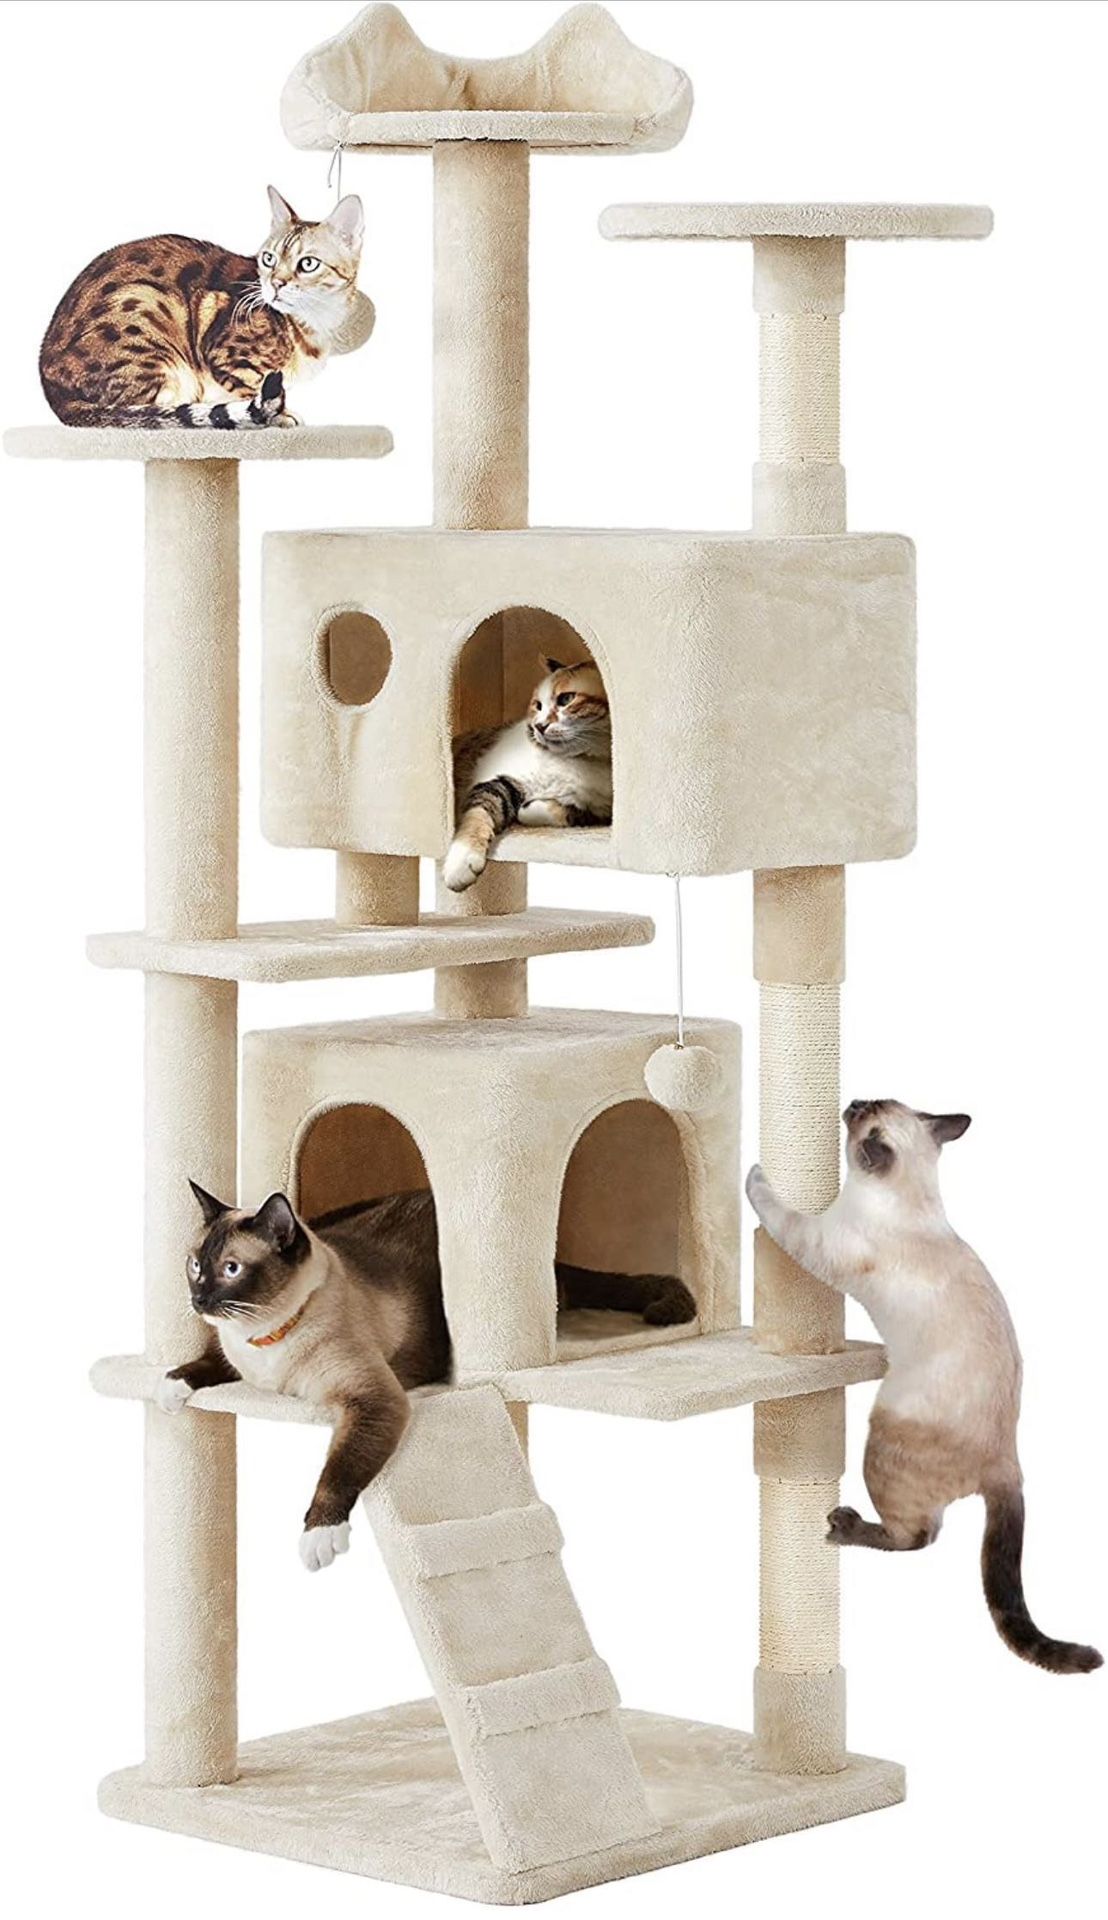 70in Multi-Level Cat Tree Large Cat Tower Cat Furniture with Condo, Scratching Posts & Dangling Ball for Indoor Cats, Beige 592469